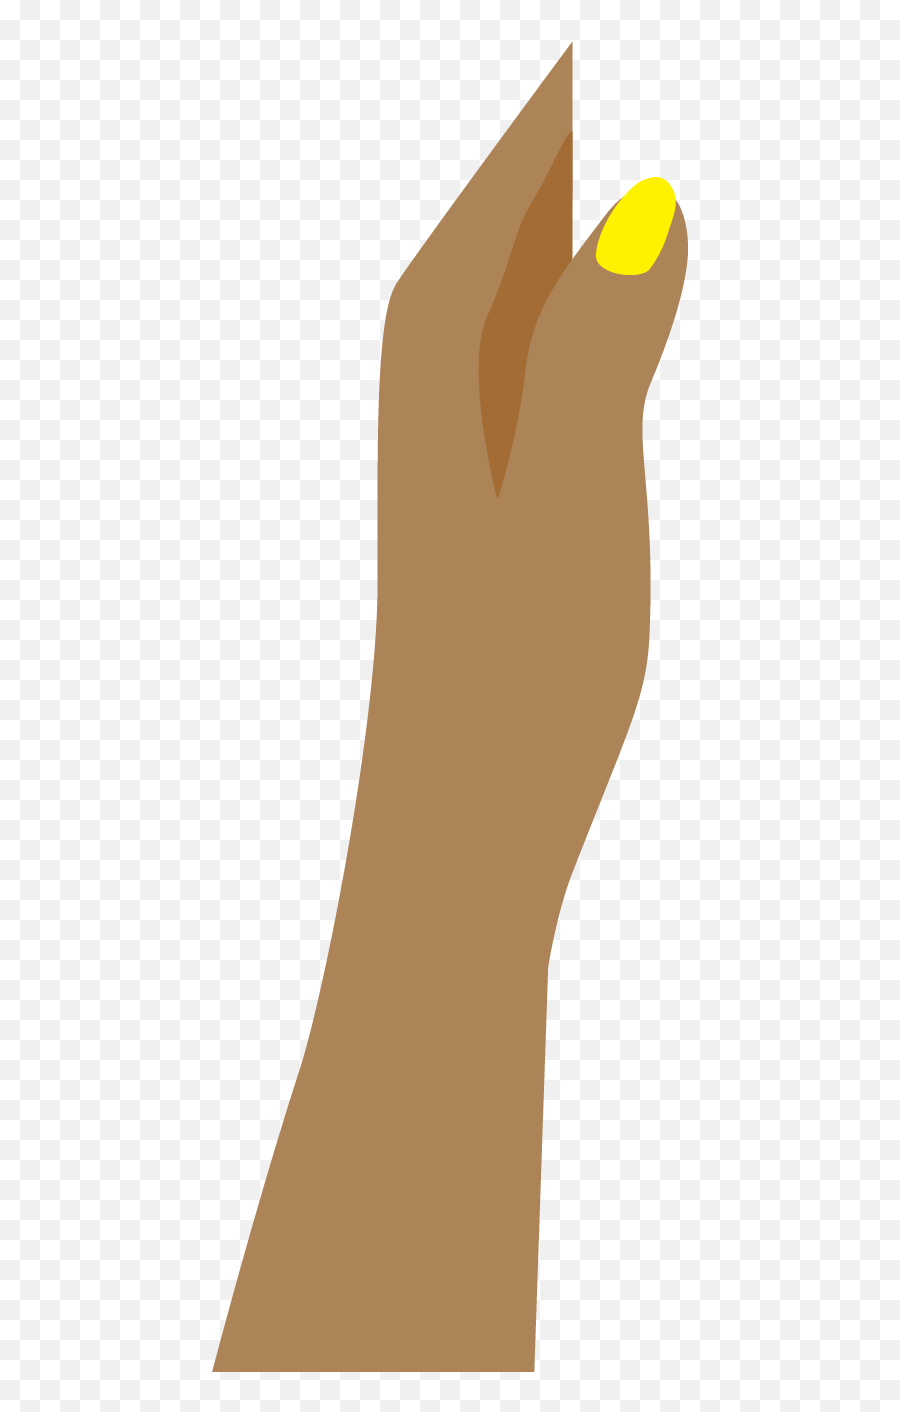 Jobs At Buzzfeed Vice And Vox Are Losing Their Appeal Fast Emoji,What Does The Italian Hand Emoji Mean